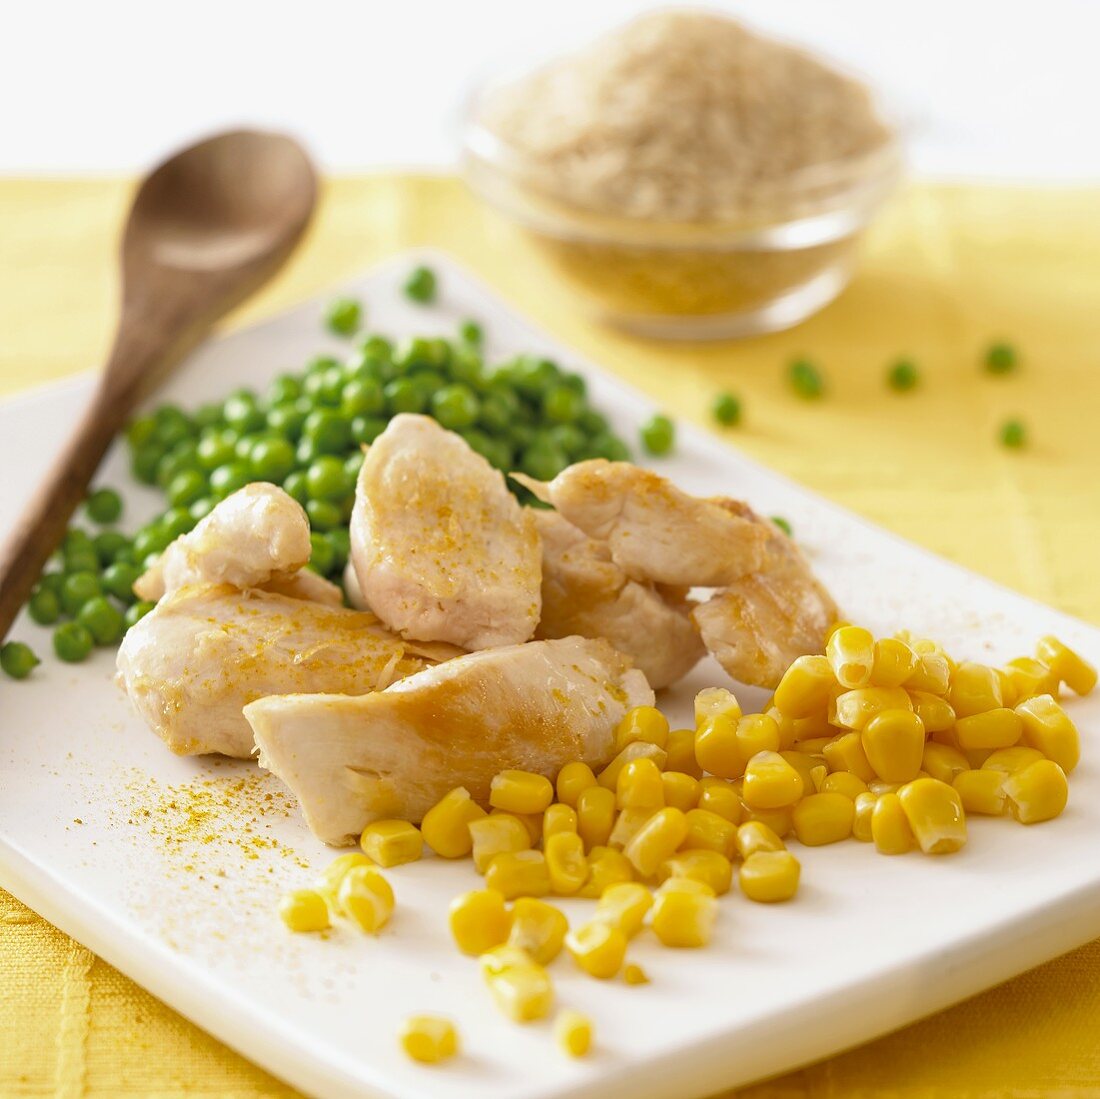 Diced turkey with sweetcorn, peas and rice